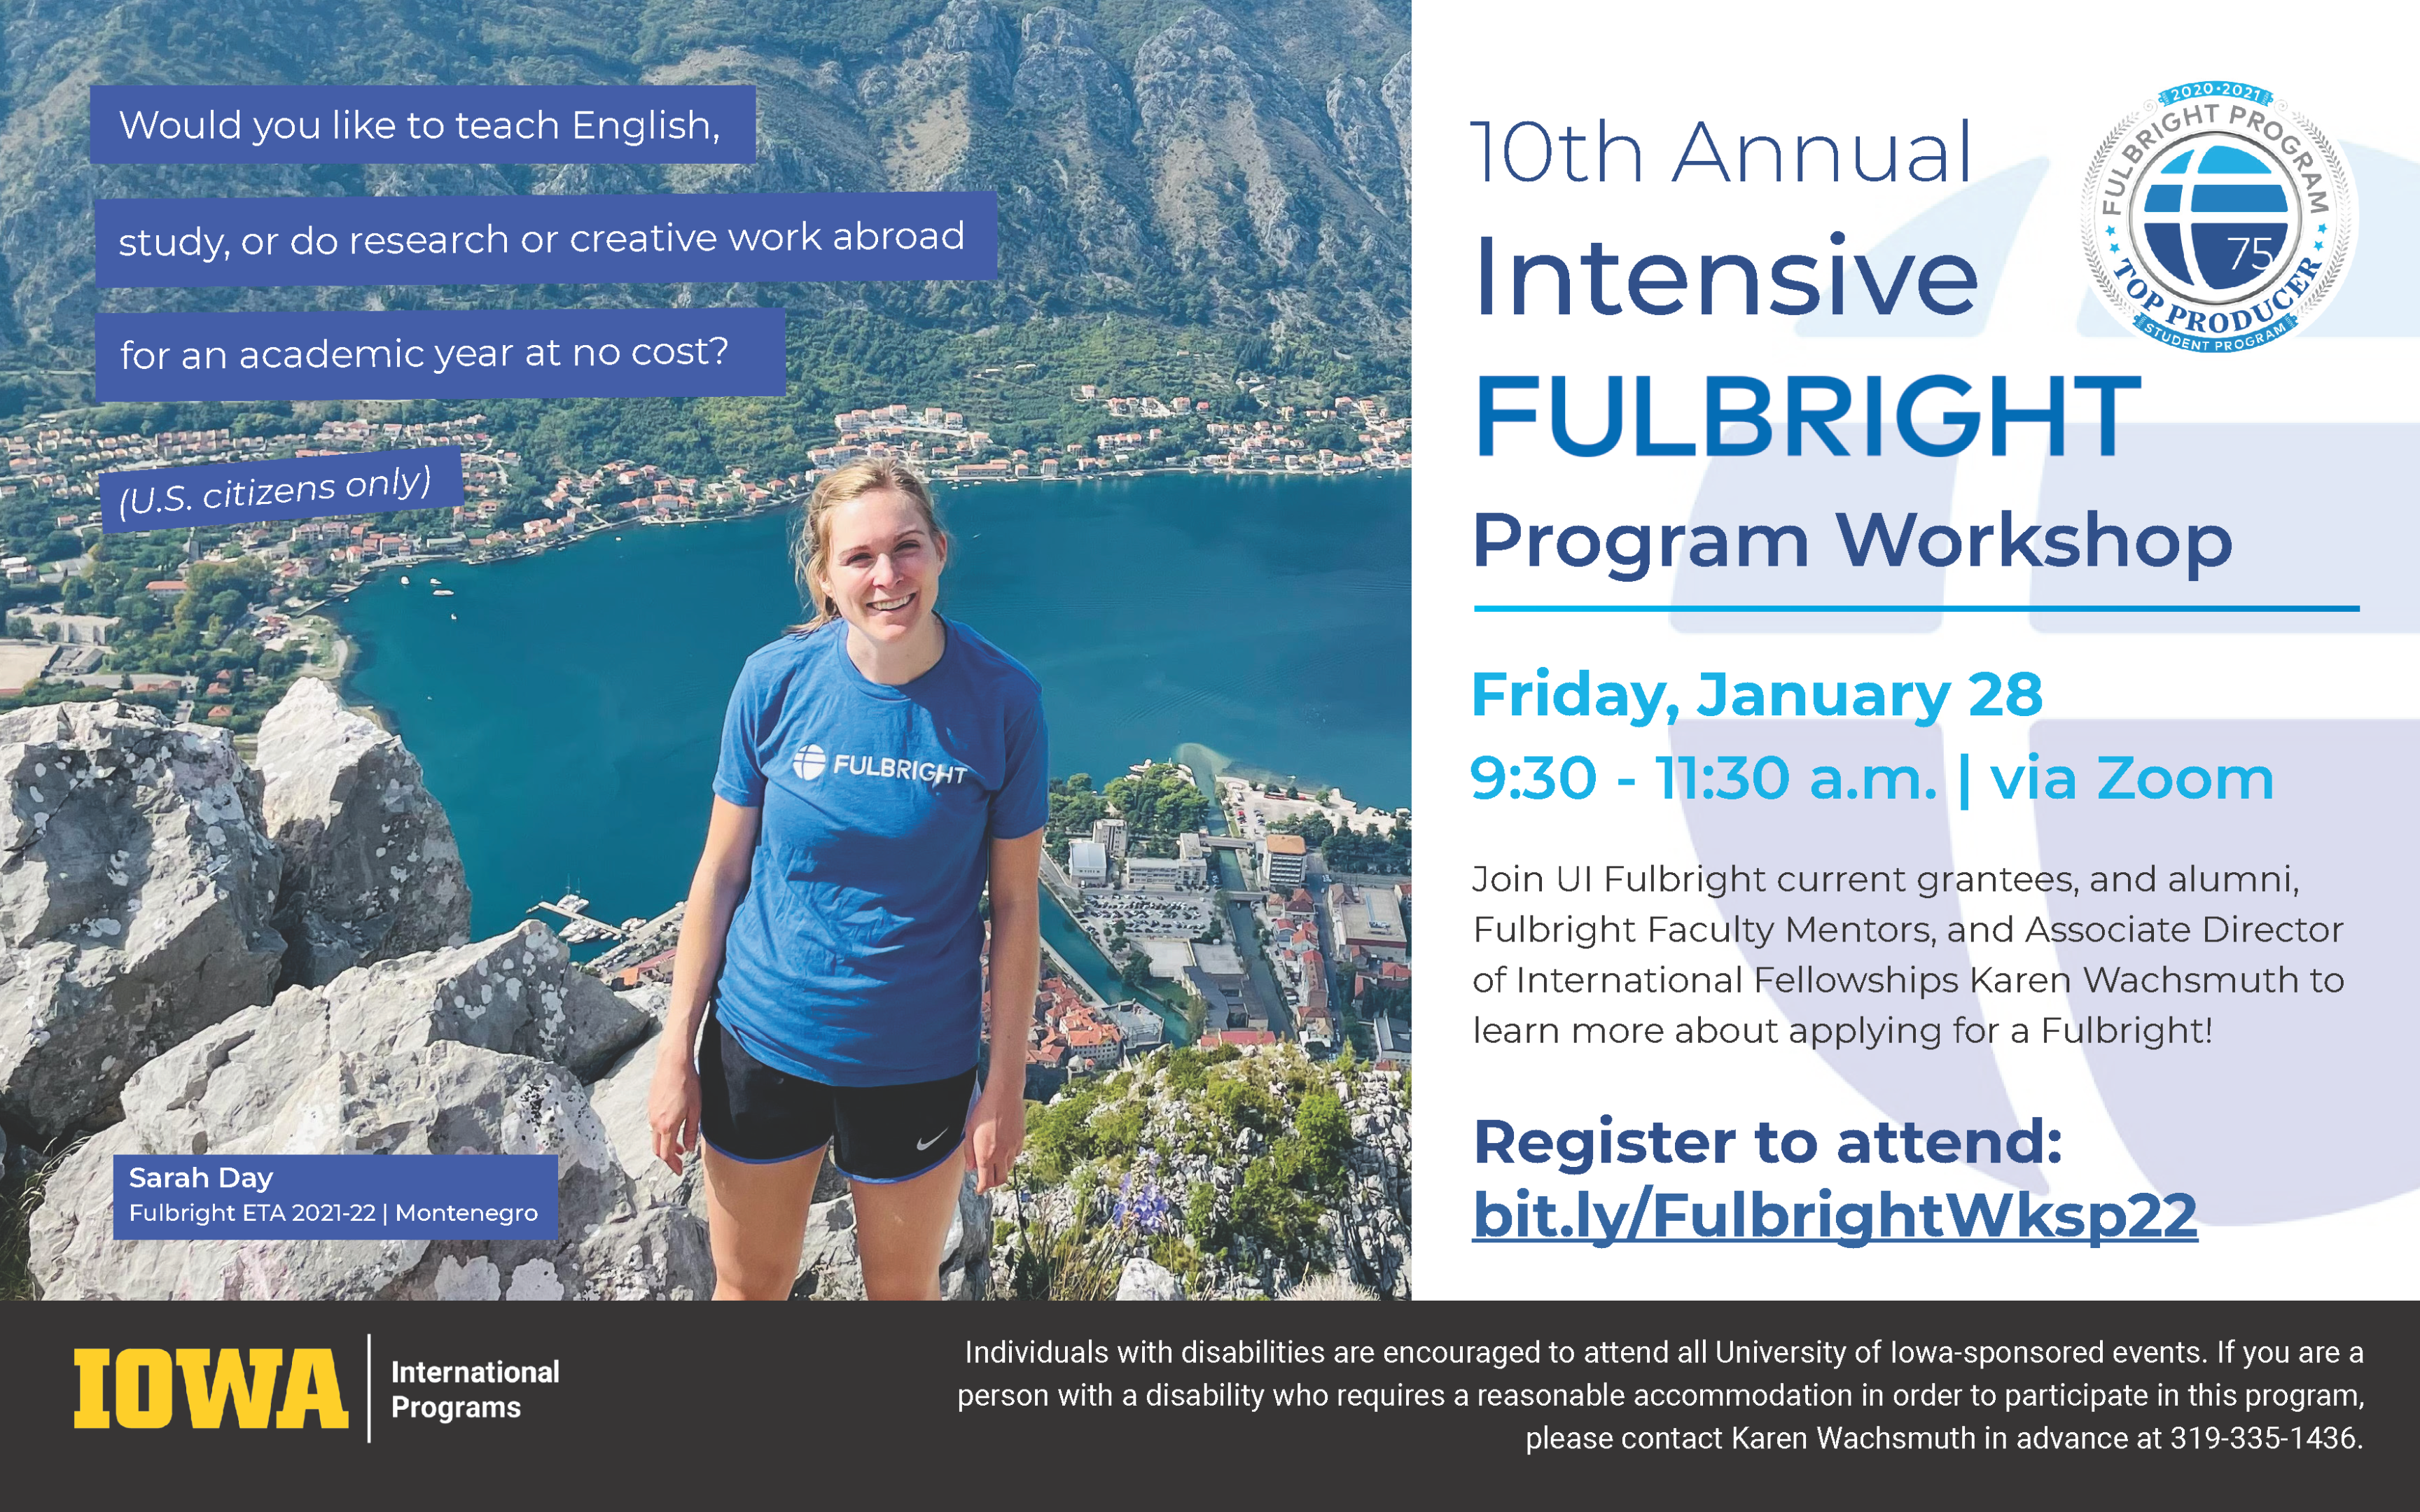 Would you like to teach English study or do research or creative work abroad for an academic year at no cost? US citizens only. Join us for the 10th annual intensive Fulbright program workshop on Friday, January 28 from 9:30 AM to 11:30 AM via zoom. Join U I Fulbright current grantees and alumni Fulbright faculty mentors and associate Director of internal fellowships Karen Wachsmuth to learn more about applying for a Fulbright! Register to attend at bit.ly/FulbrightWKSP22